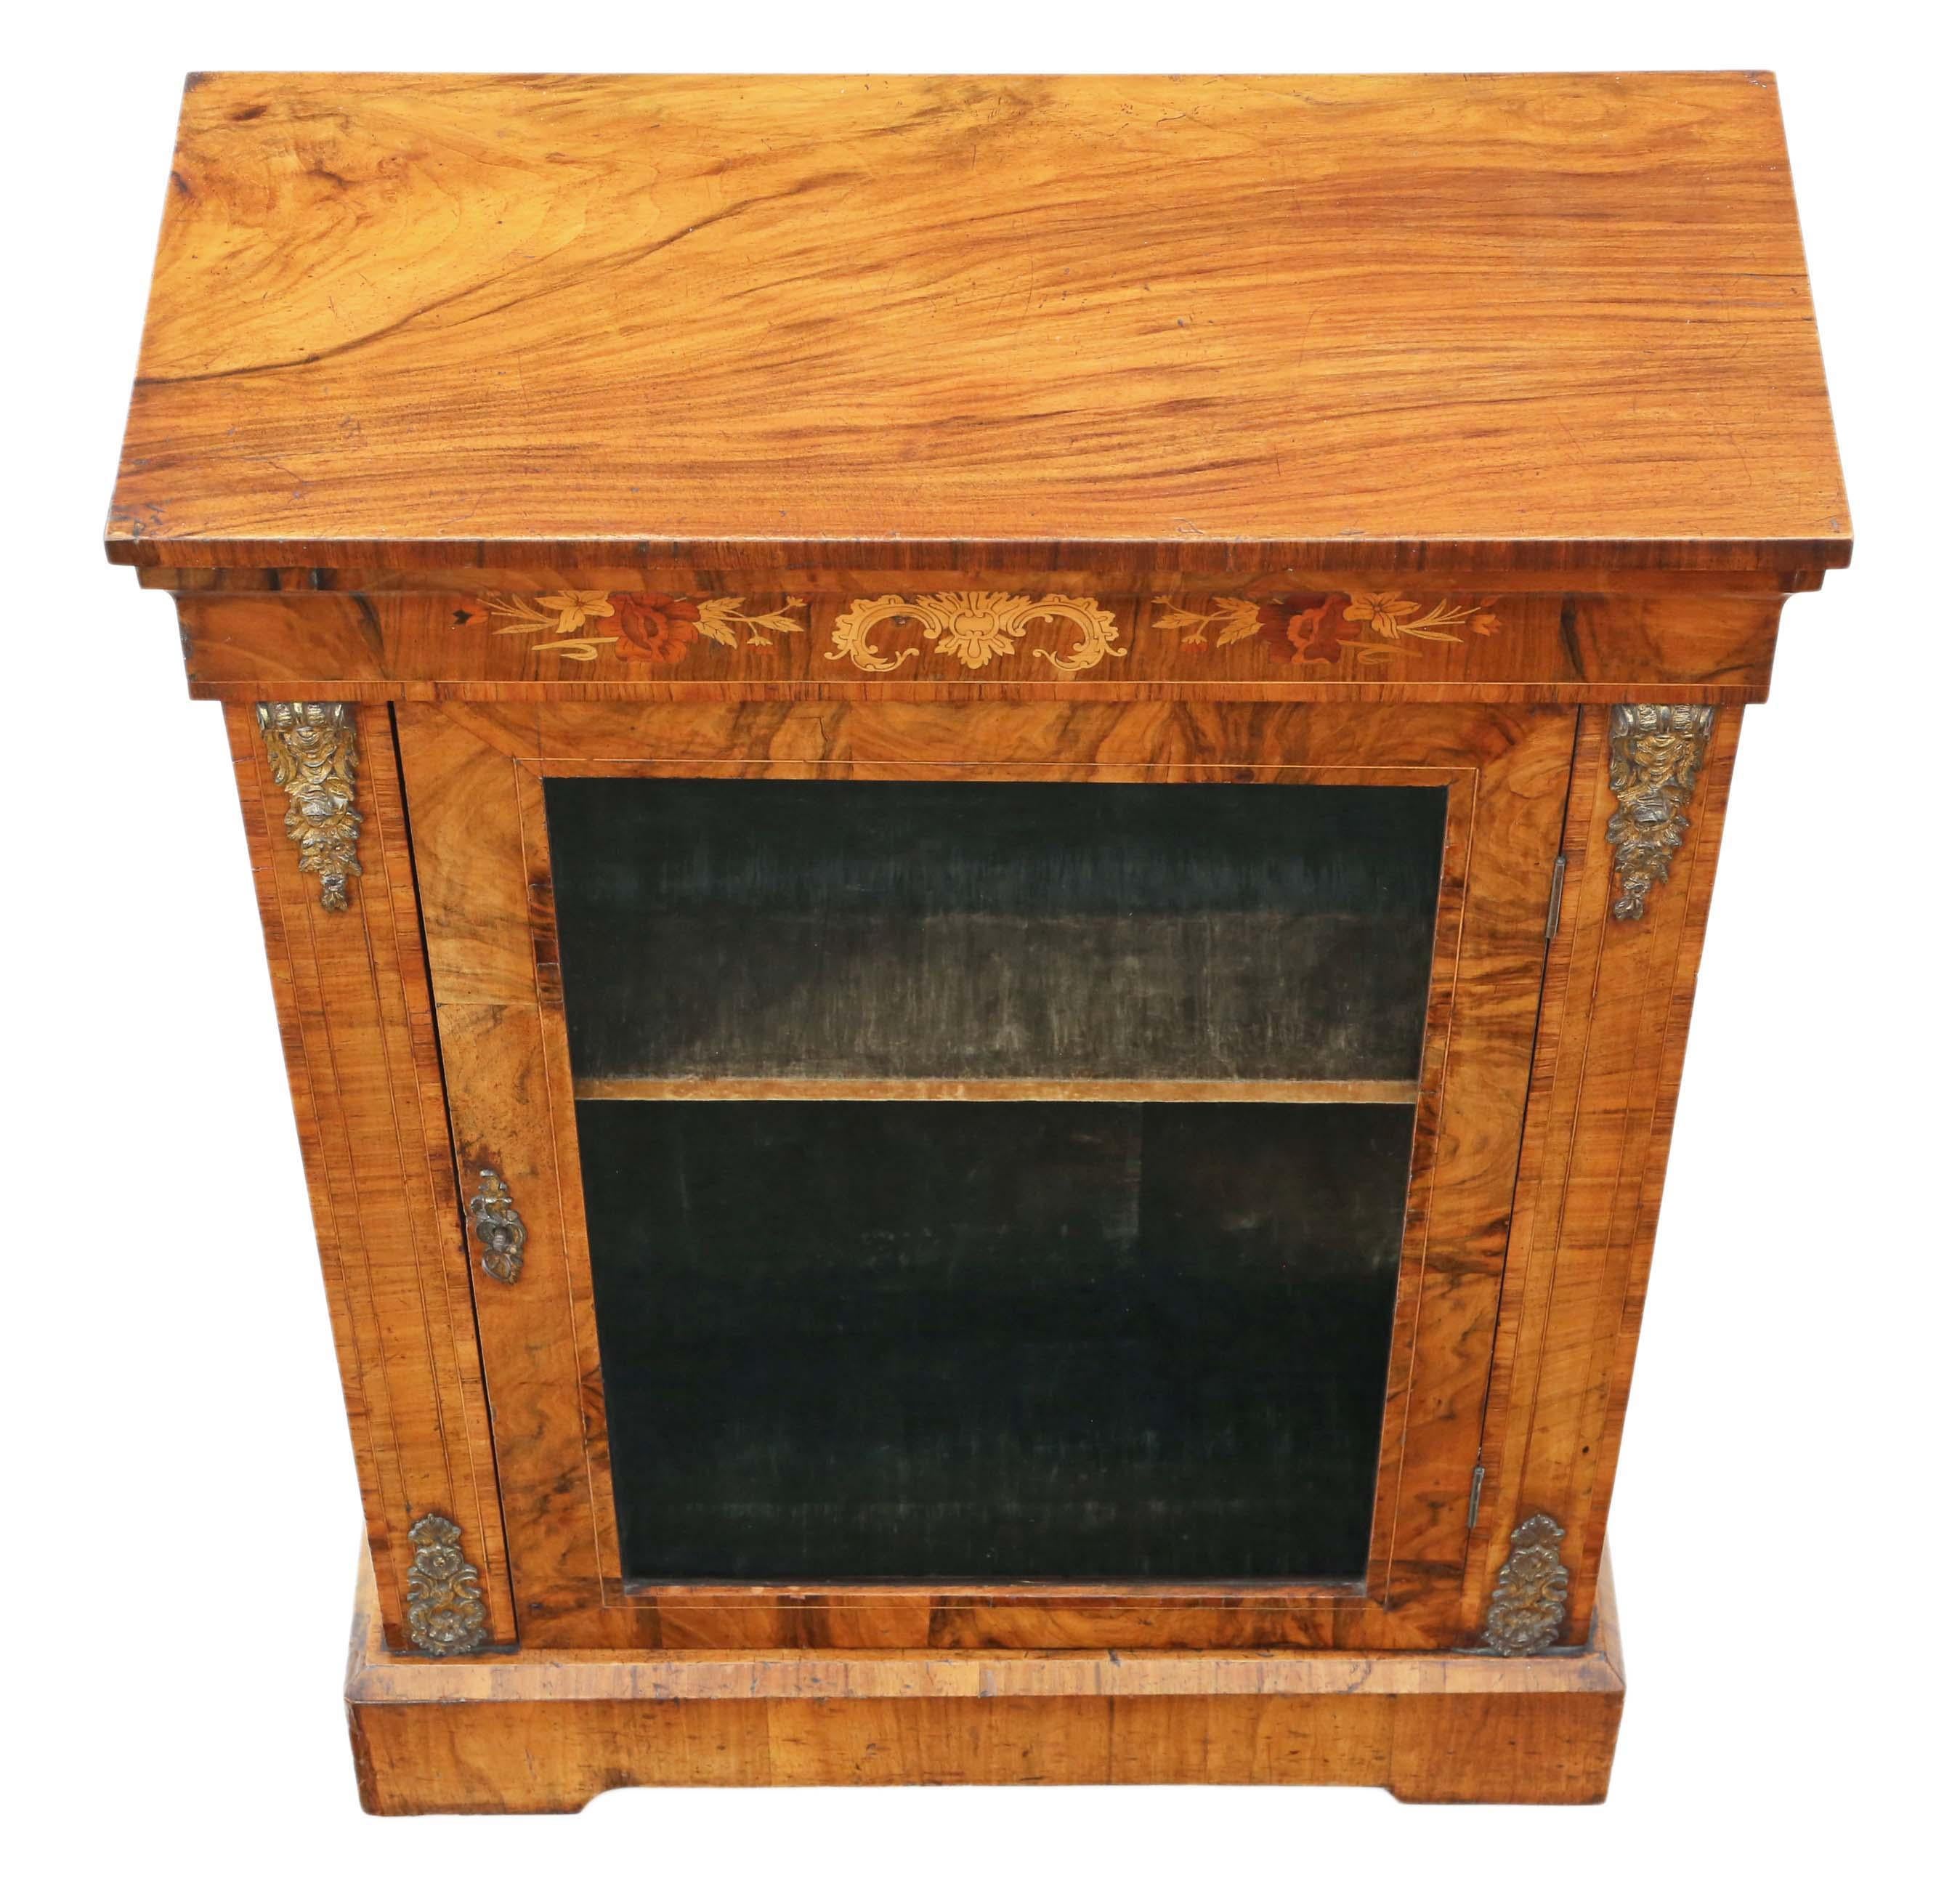 Antique quality inlaid burr walnut pier display cabinet C1880. The best colour and patina.

Solid and strong, with no loose joints. We have a key. Rare lift up lid with concealed storage compartment. Lovely marquetry inlay and ormolu brass